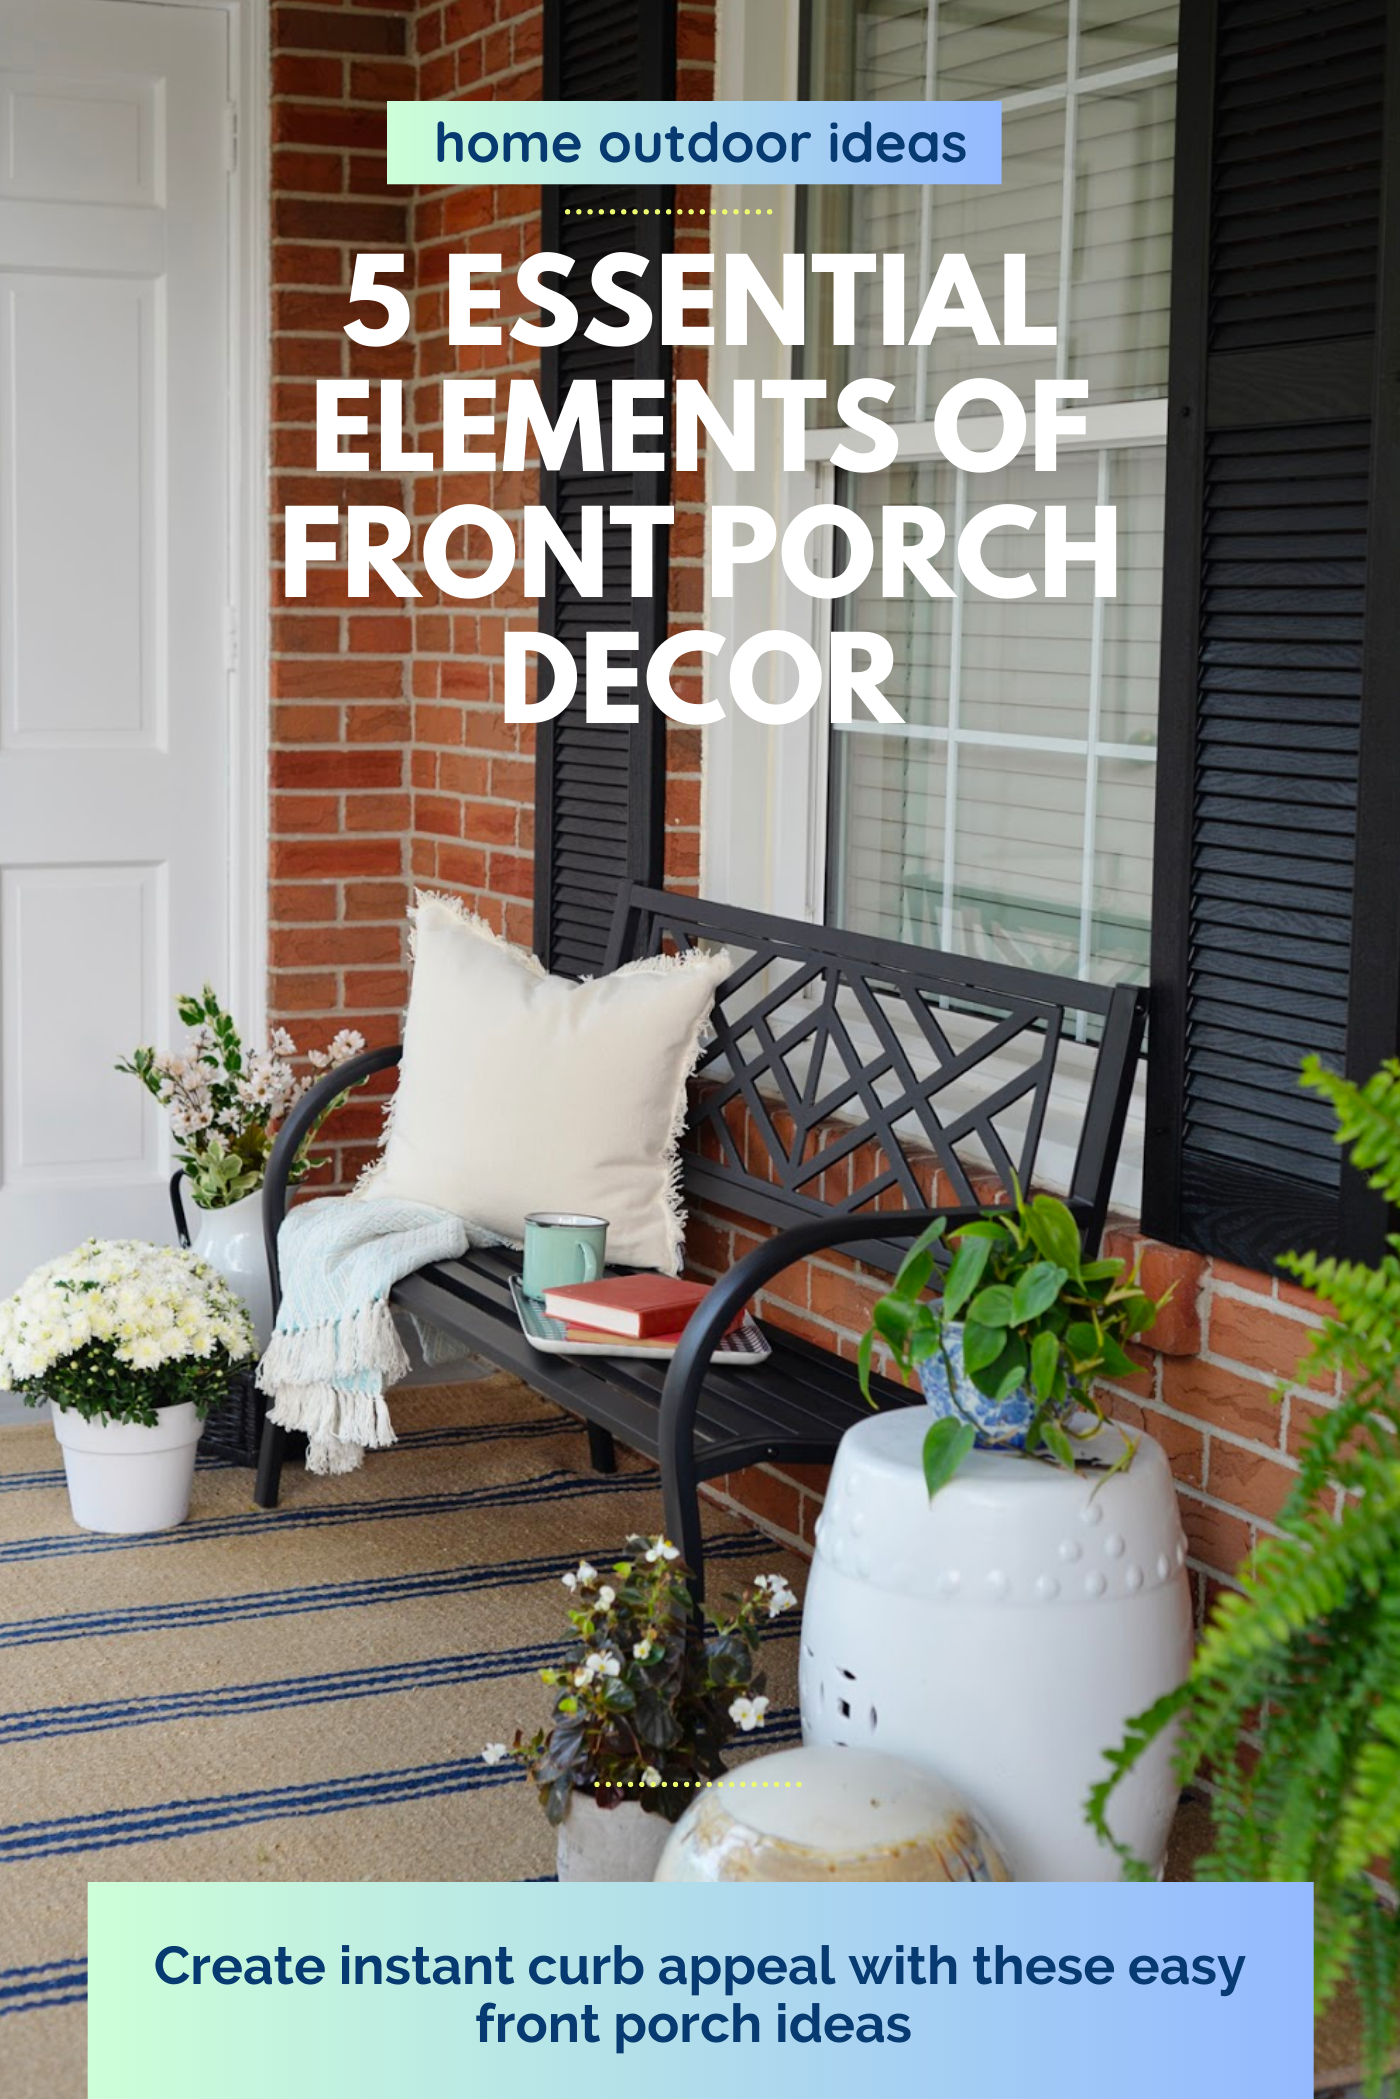 home outdoor idea with front porch bench, outdoor rug, plants, and decorative pillows